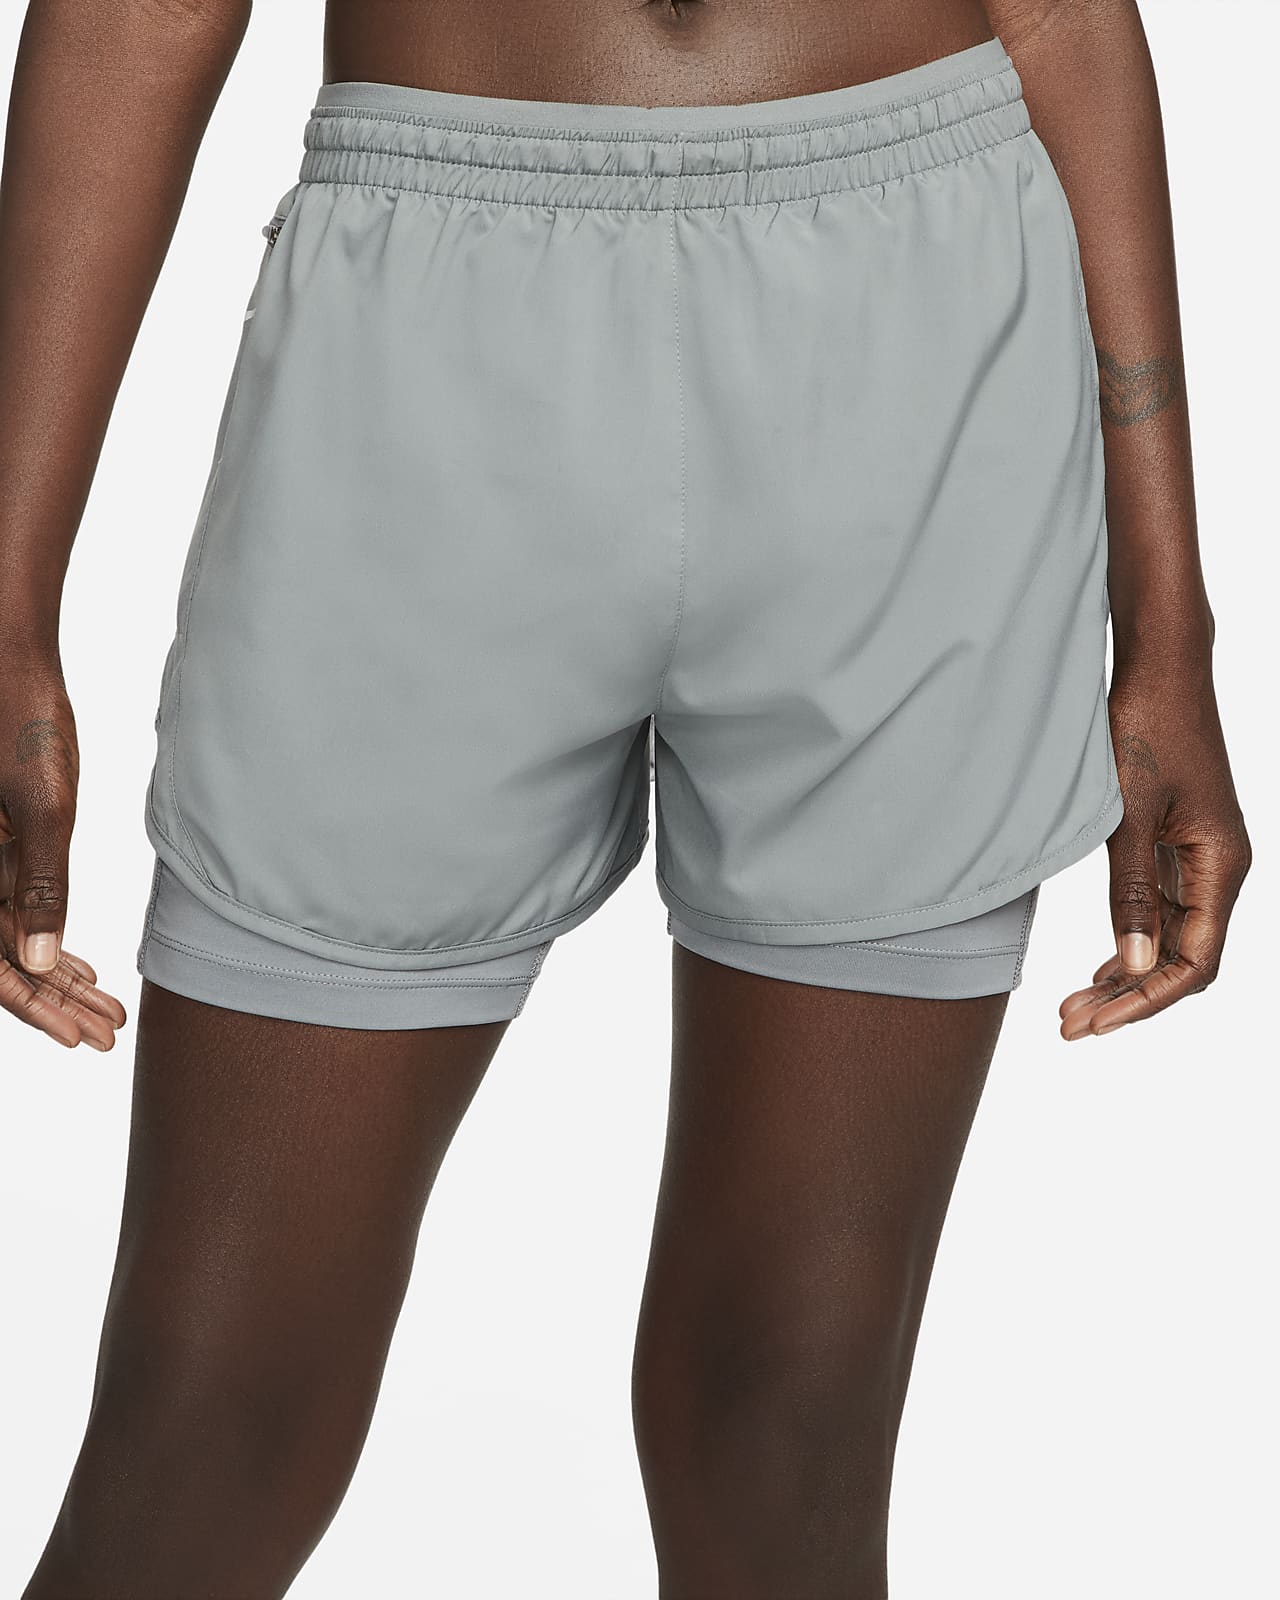 Nike Women's Tempo Luxe Run Division 2-in-1 White Running Shorts